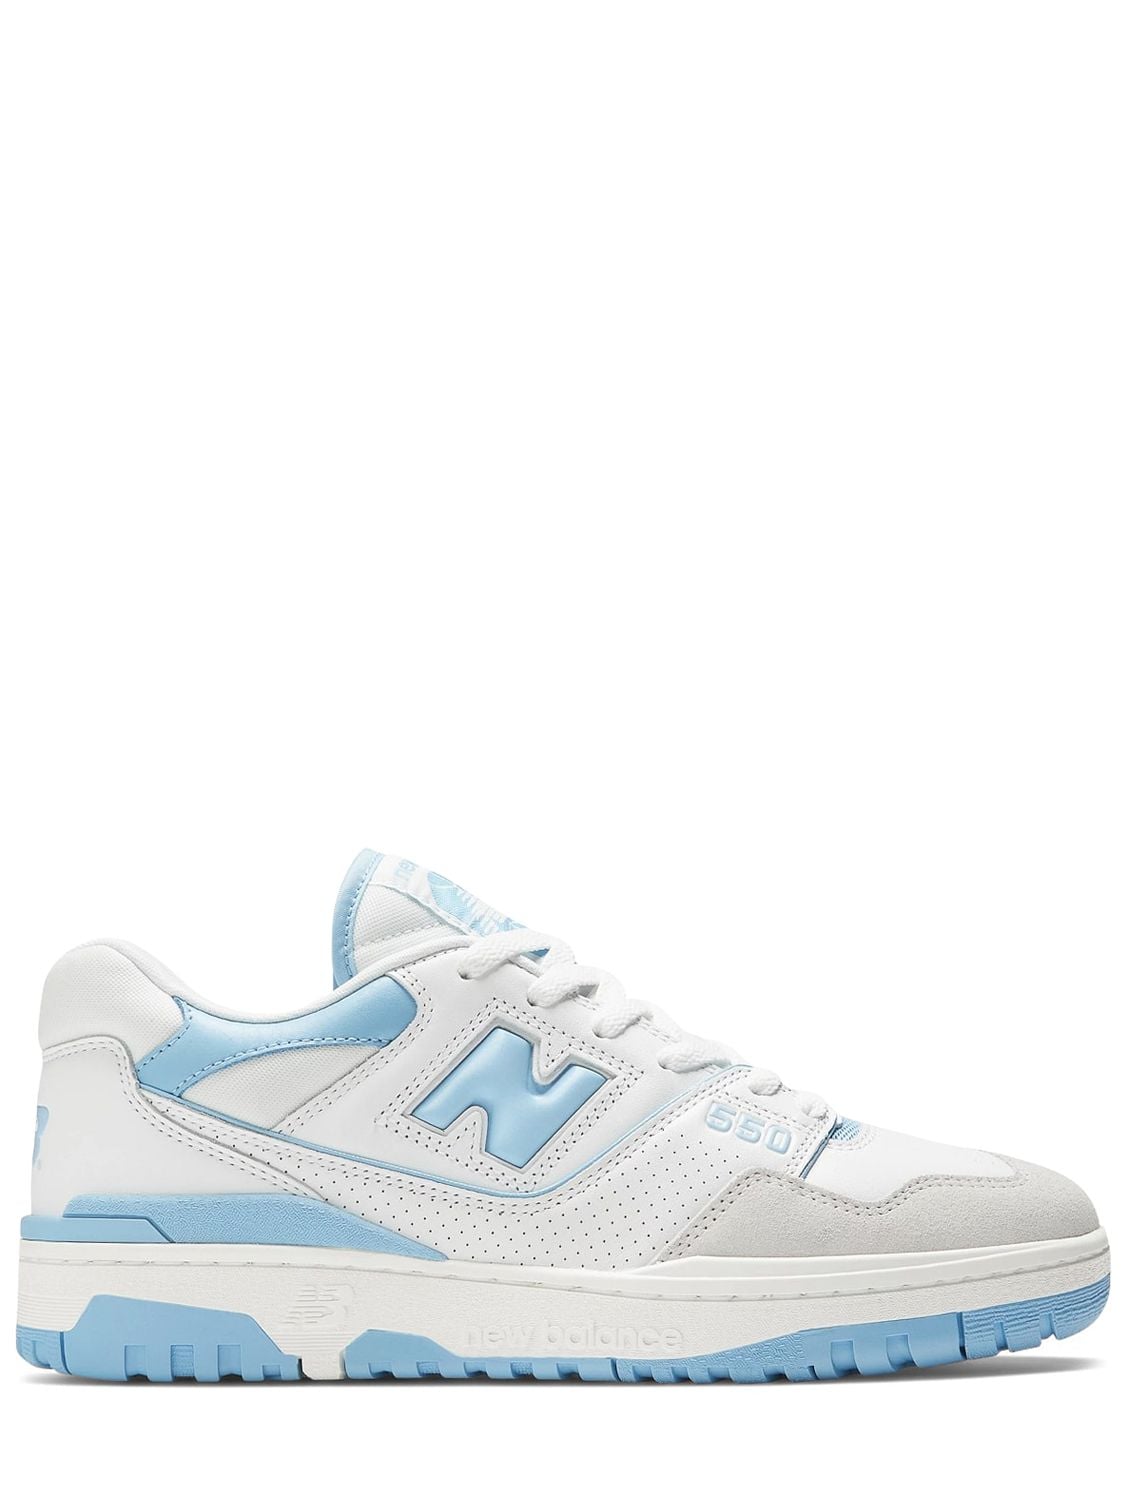 New Balance 550 Leather & Suede Sneakers In White/light Blue | ModeSens